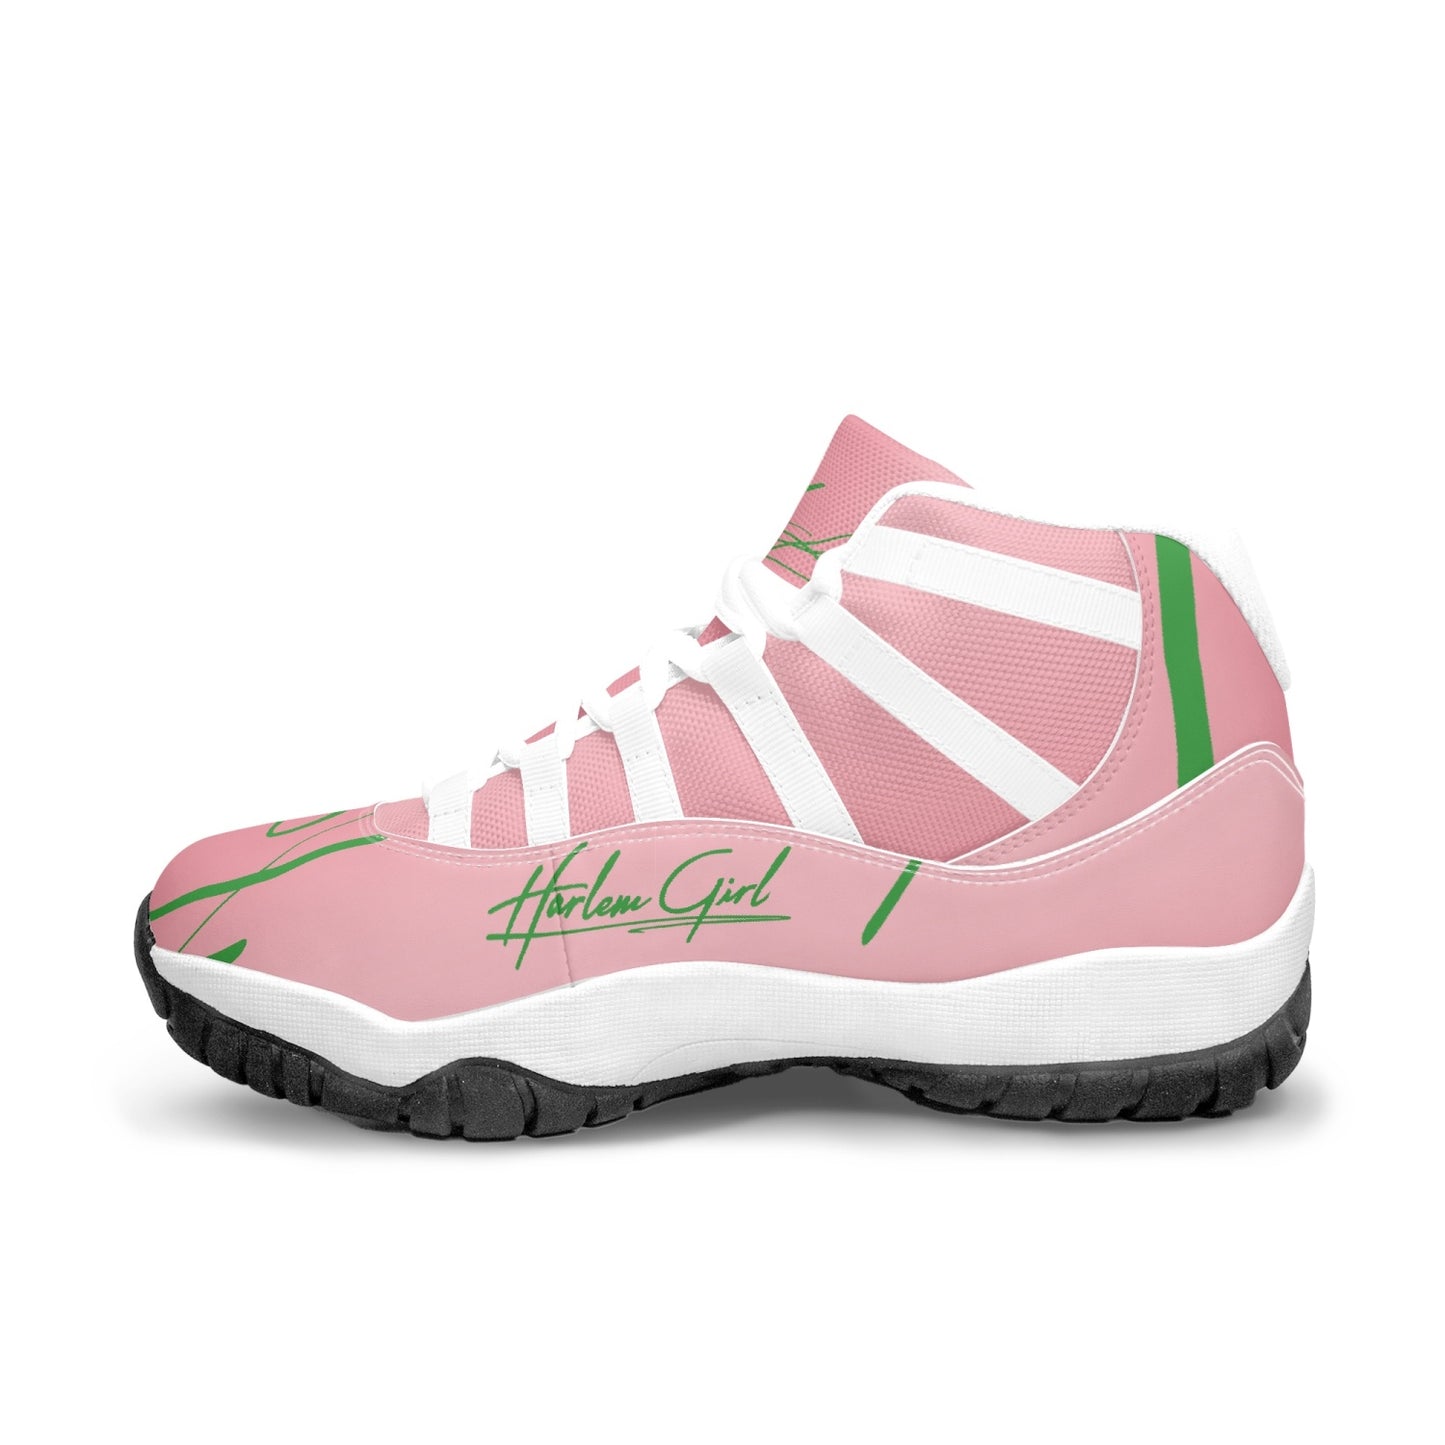 Harlem Girl "Tribe" Basketball - Pink and Green w/ White Trim (Women's)